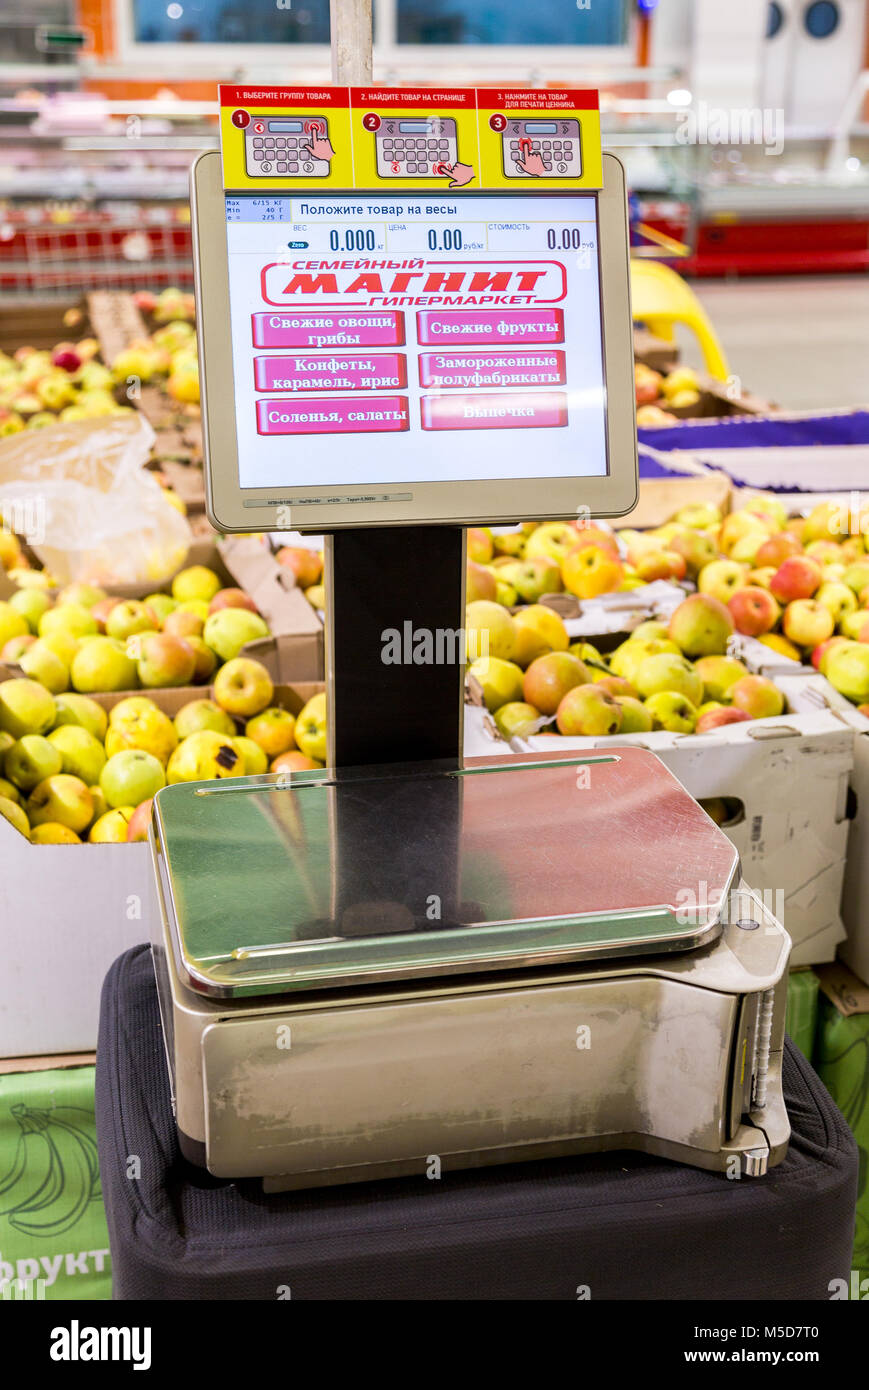 Samara, Russia - October 1, 2017: Electronic scales in the new hypermarket Magnit. Russia's largest retailer Stock Photo